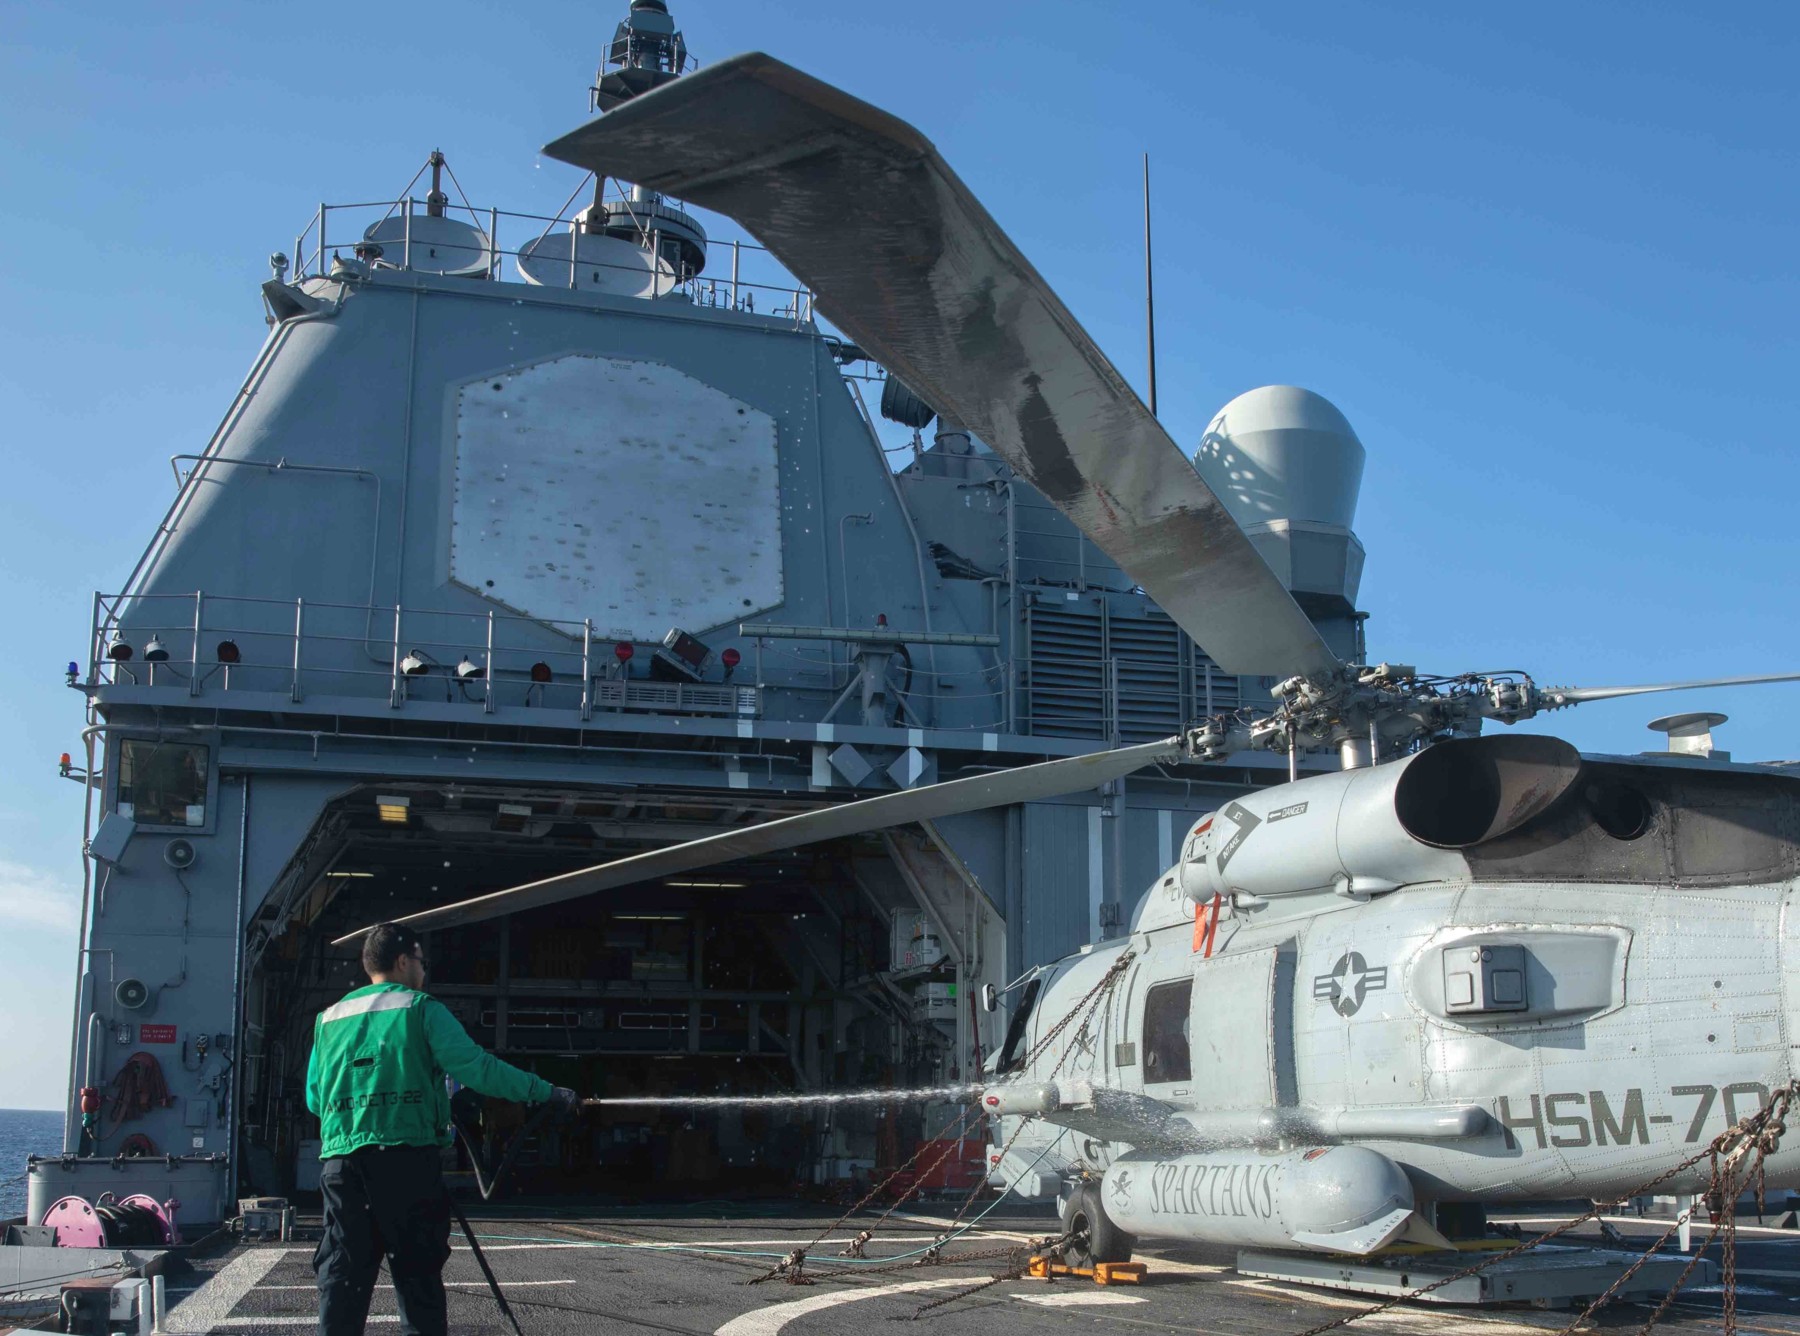 cg-60 uss normandy ticonderoga class guided missile cruiser aegis us navy hangar helicopter 145